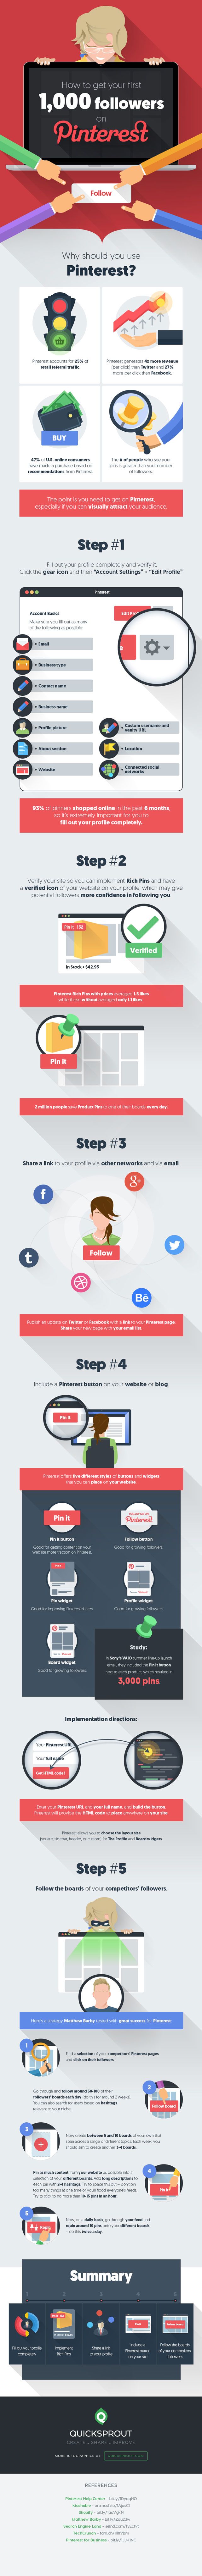 1530350881_124_Marketing-Infographic-Pinterest-marketing-get-your-first-1000-followers-by-following-these-steps.-Cl Marketing Infographic : Pinterest marketing: get your first 1,000 followers by following these steps. Cl...